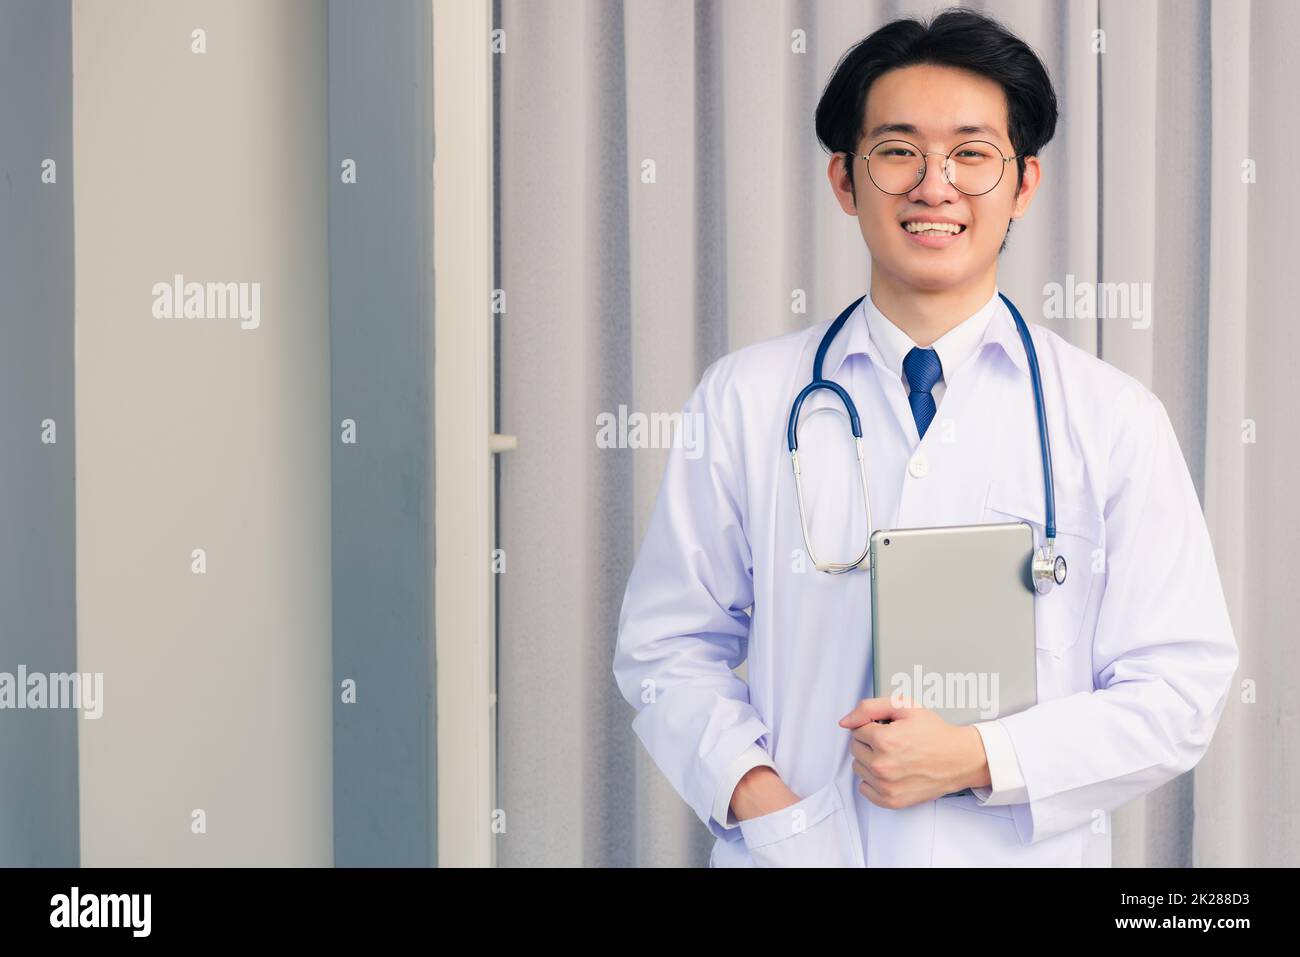 Doctor man smiling in uniform and stethoscope neck strap tablet on hand Stock Photo